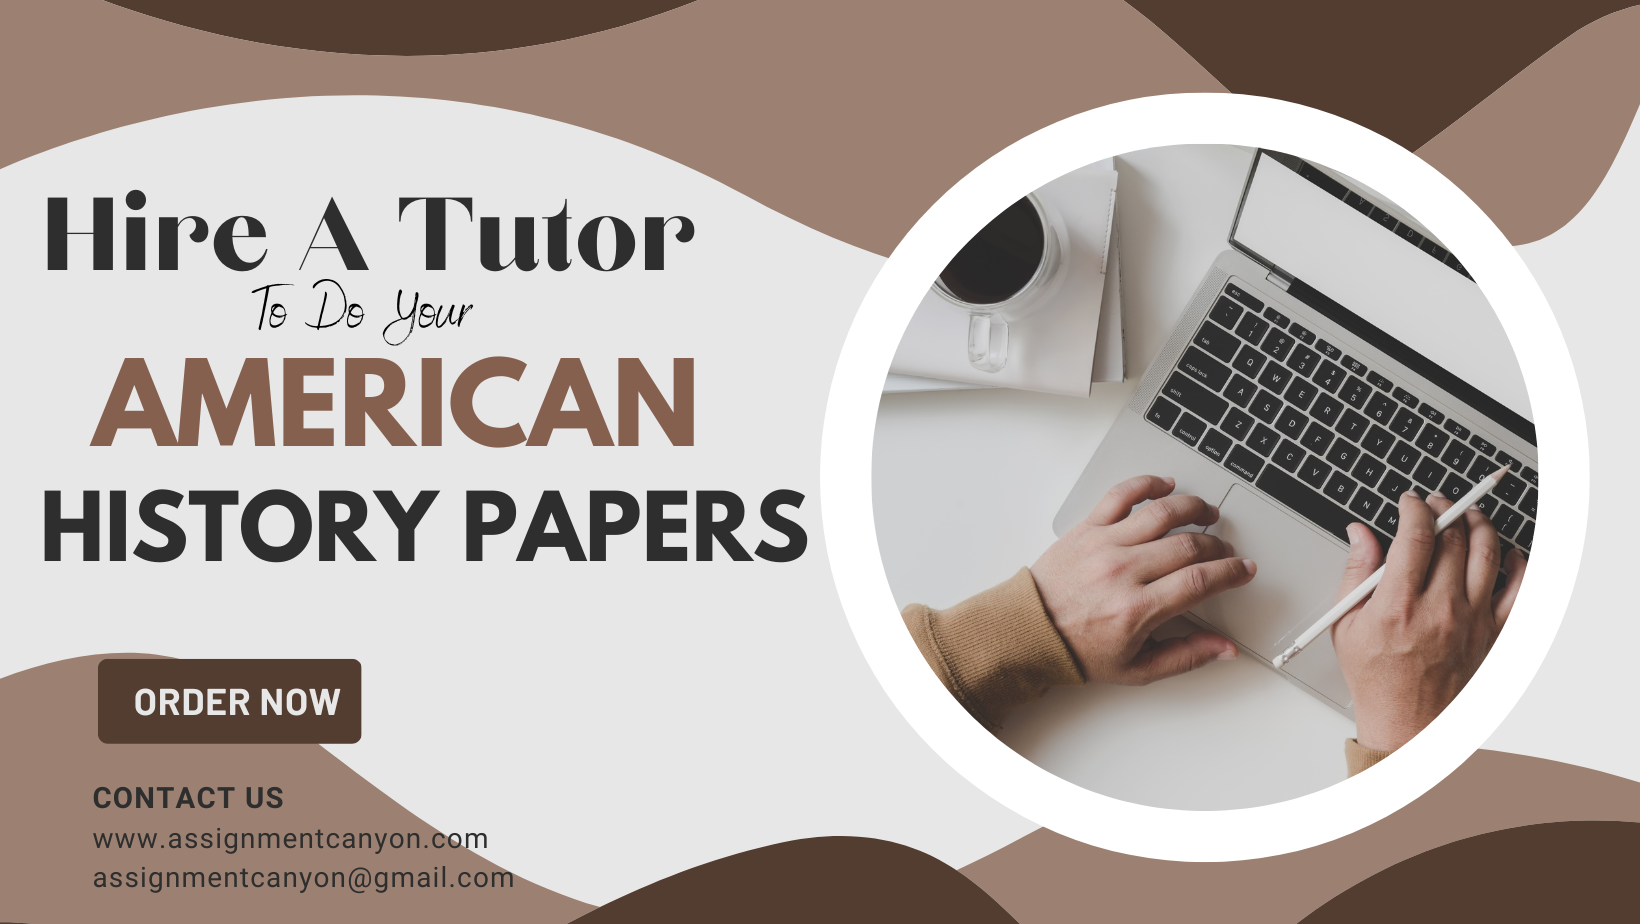 Hire A Tutor To Do Your American History Papers From Assignment Canyon